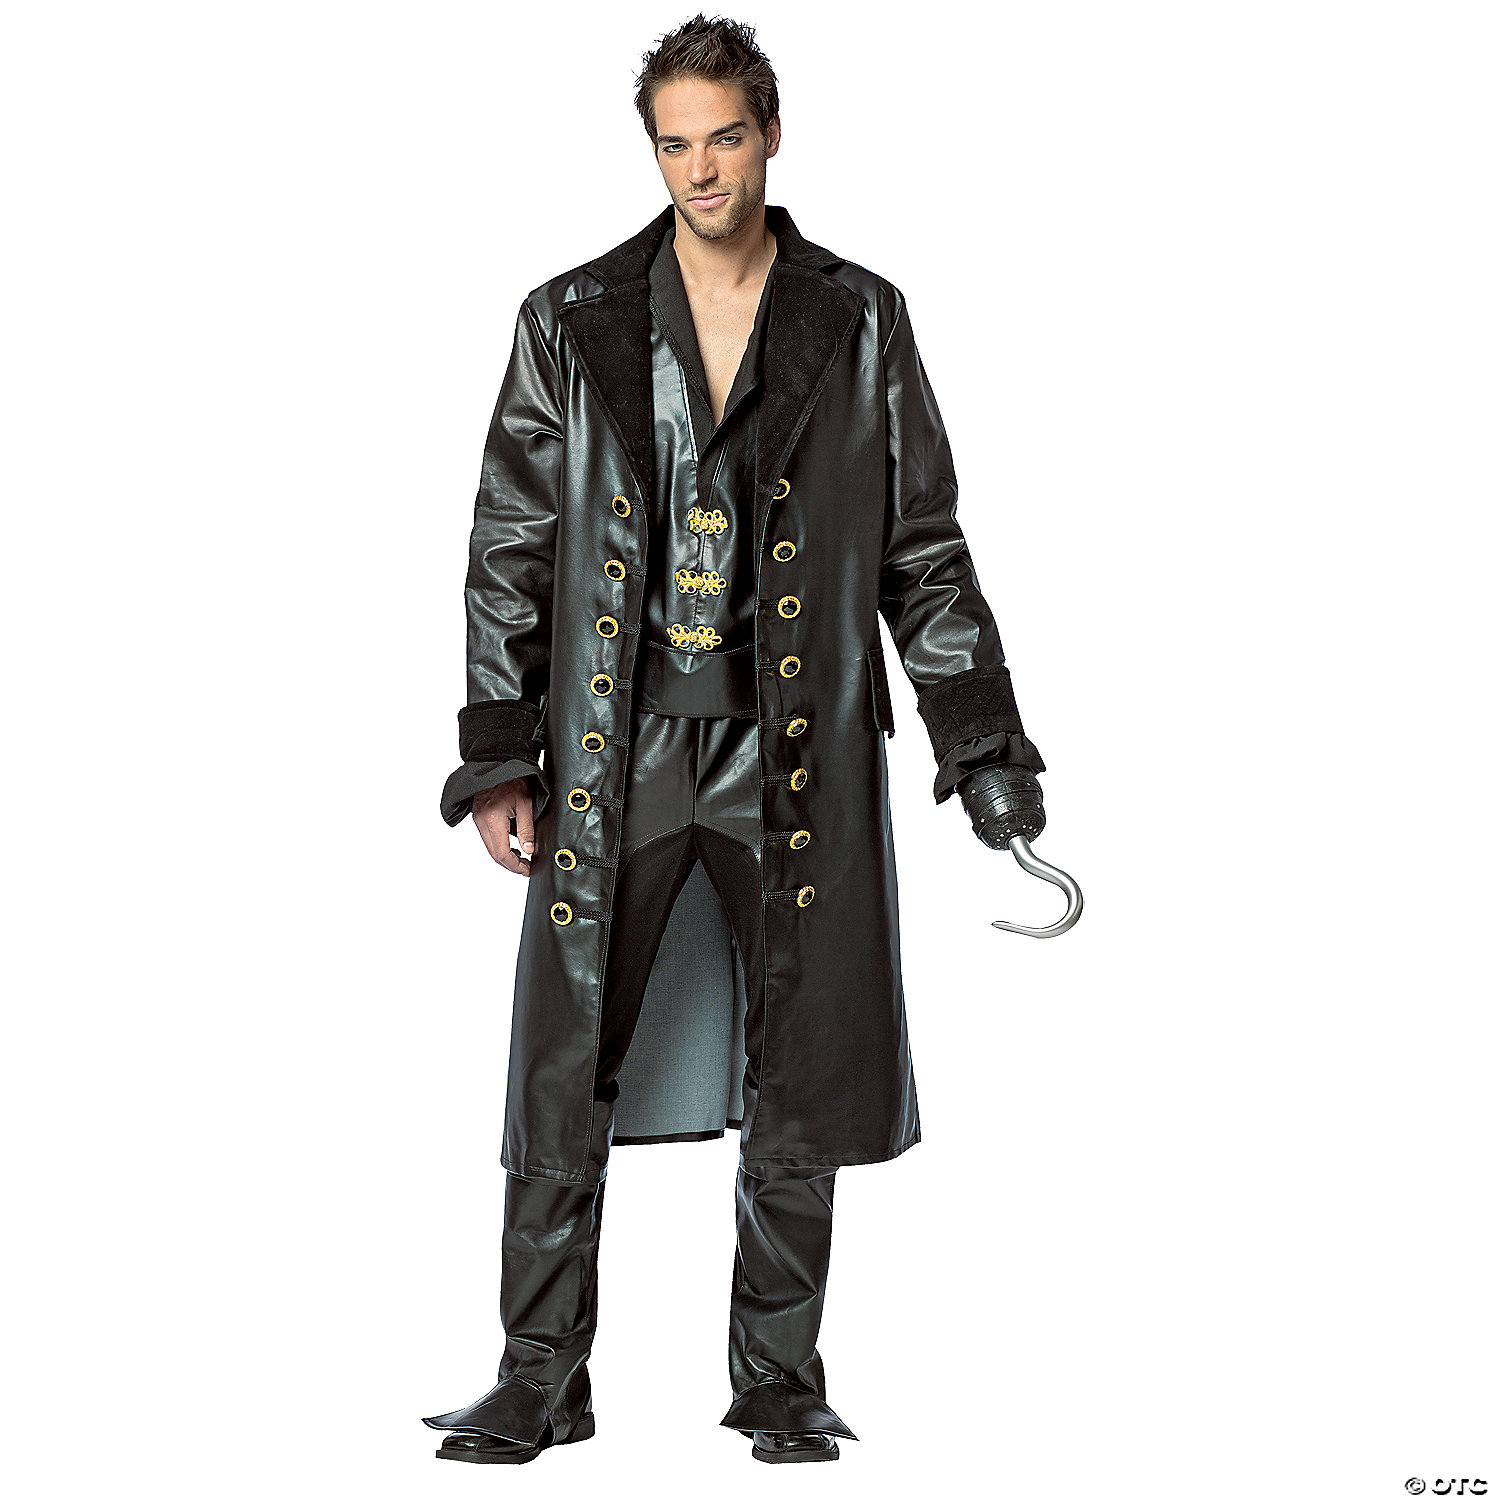 https://s7.orientaltrading.com/is/image/OrientalTrading/VIEWER_ZOOM/mens-once-upon-a-time-hook-costume-xx-large-50-52~gc3853xxl